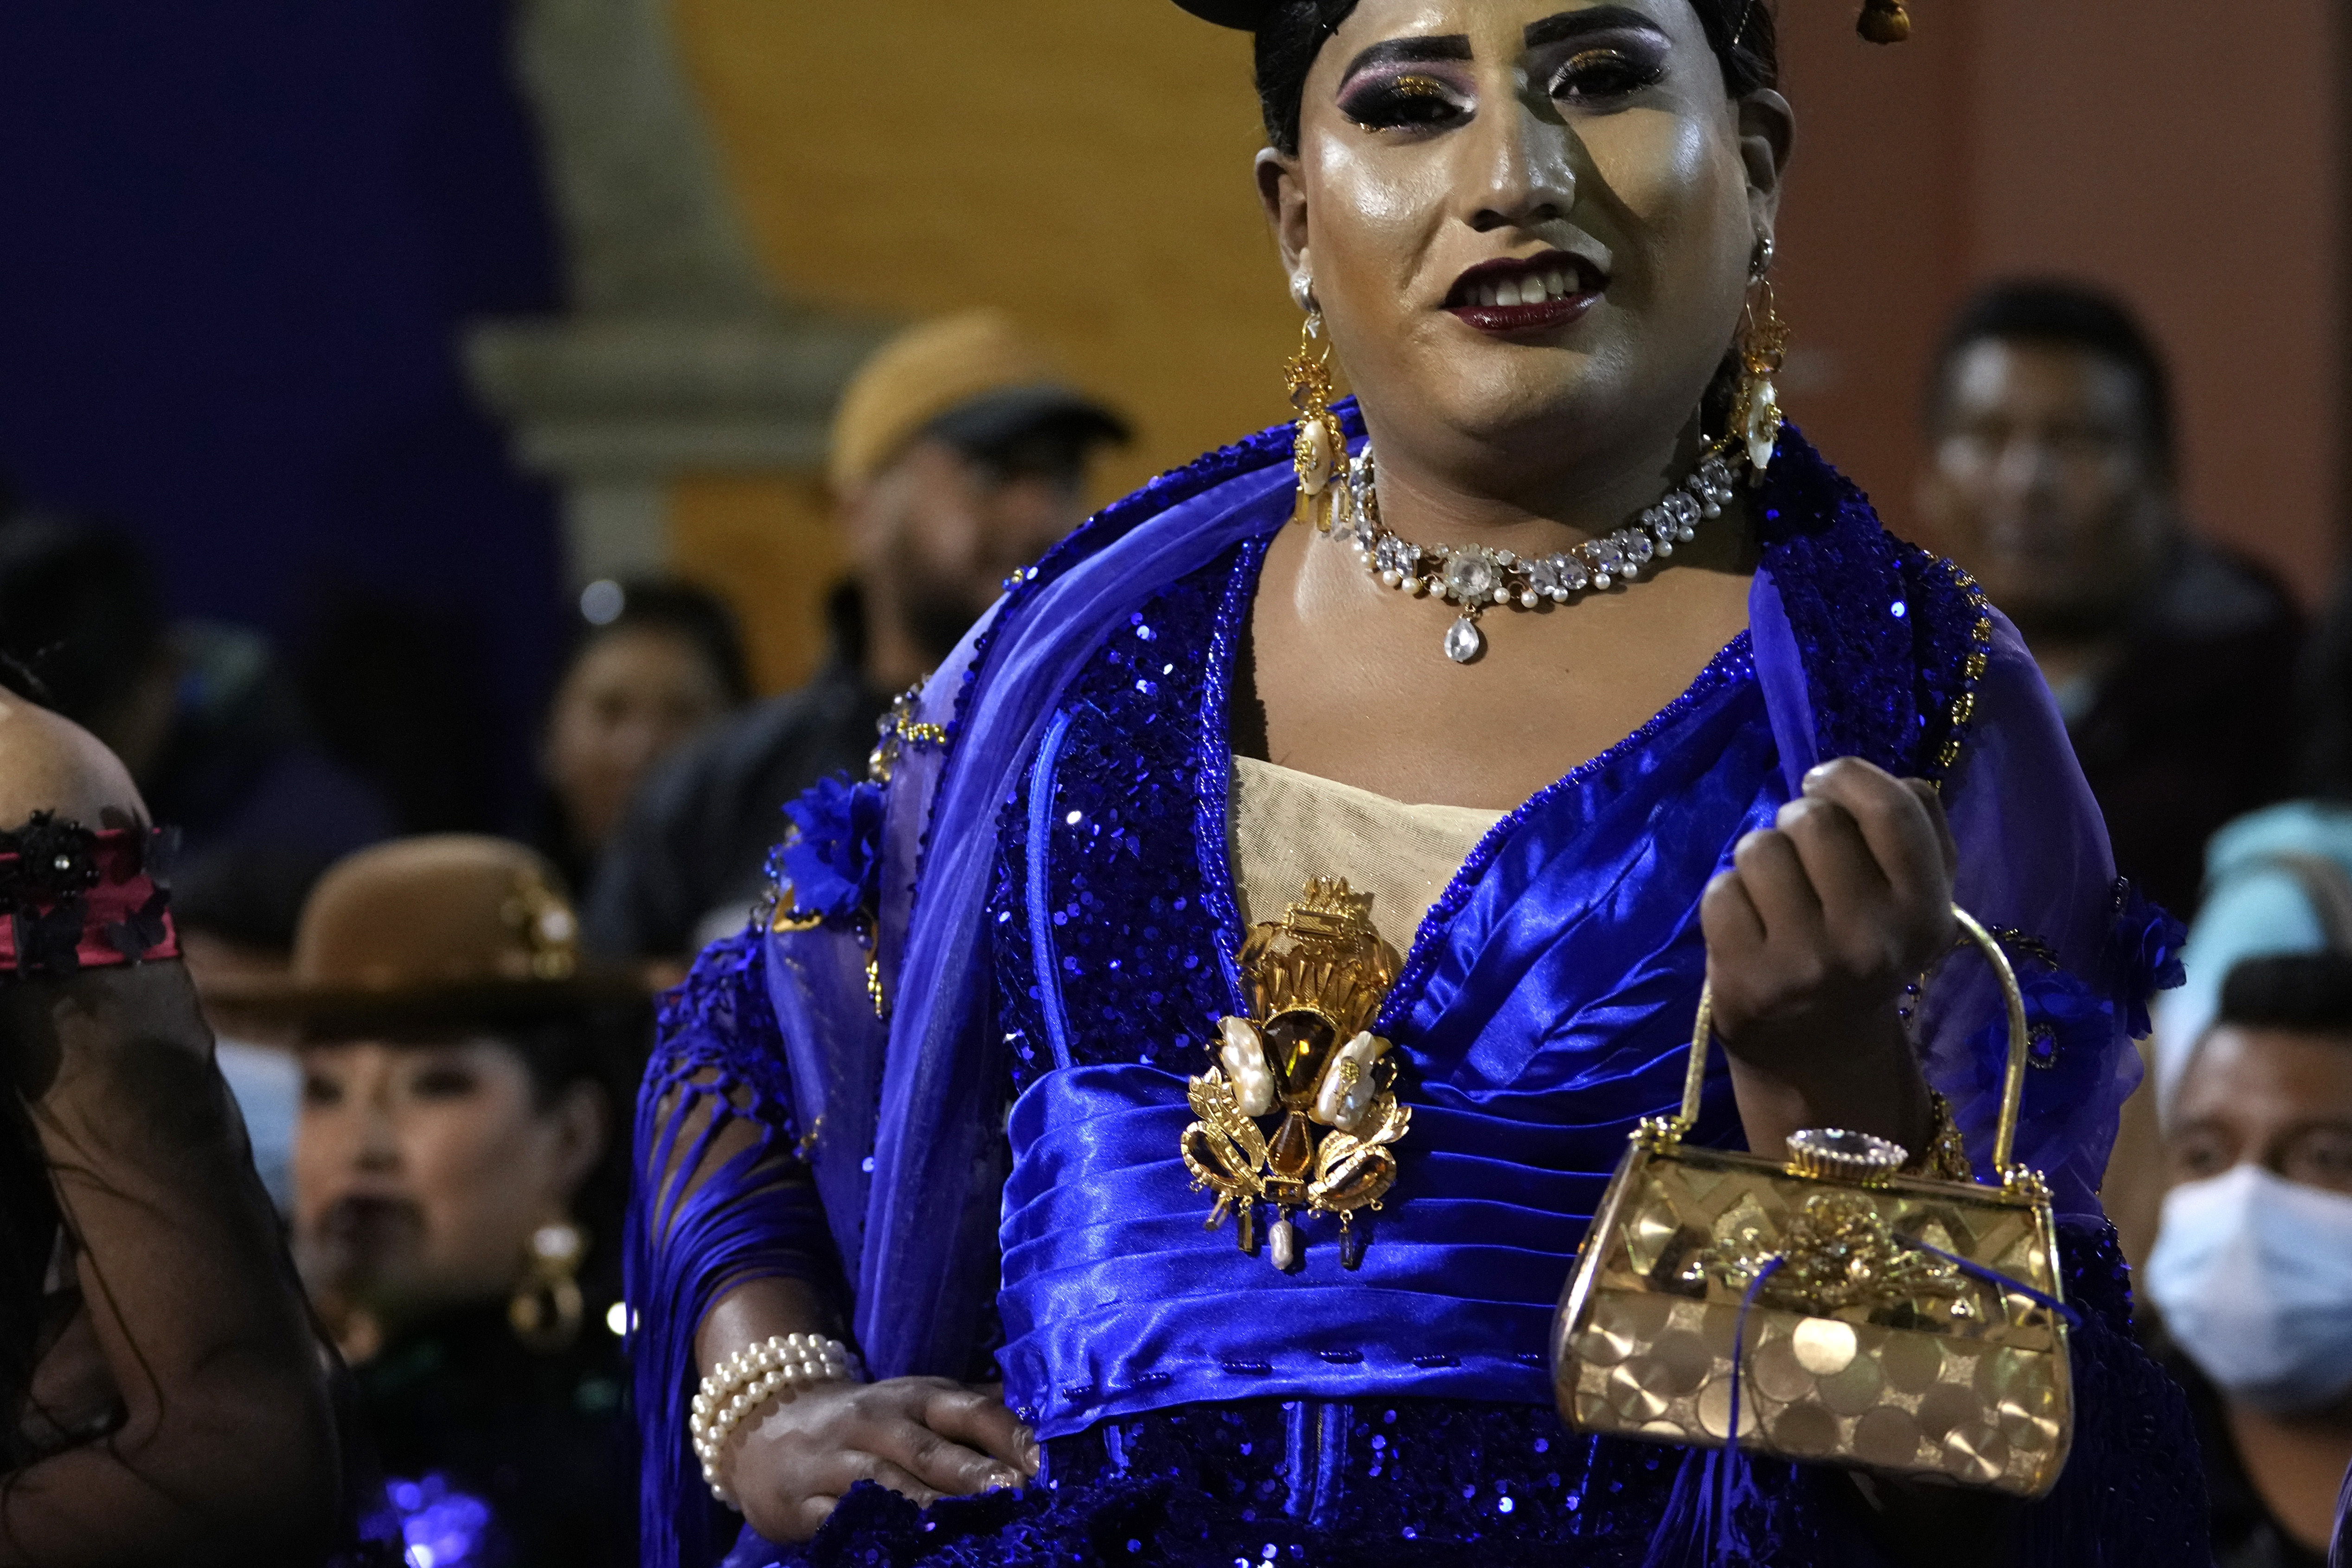 A person parades in the typical clothing of Bolivian women during the Cholita Transformista election, organized by the LGBT community in La Paz, Bolivia, on January 28, 2023. (AP Photo/Juan Karita)